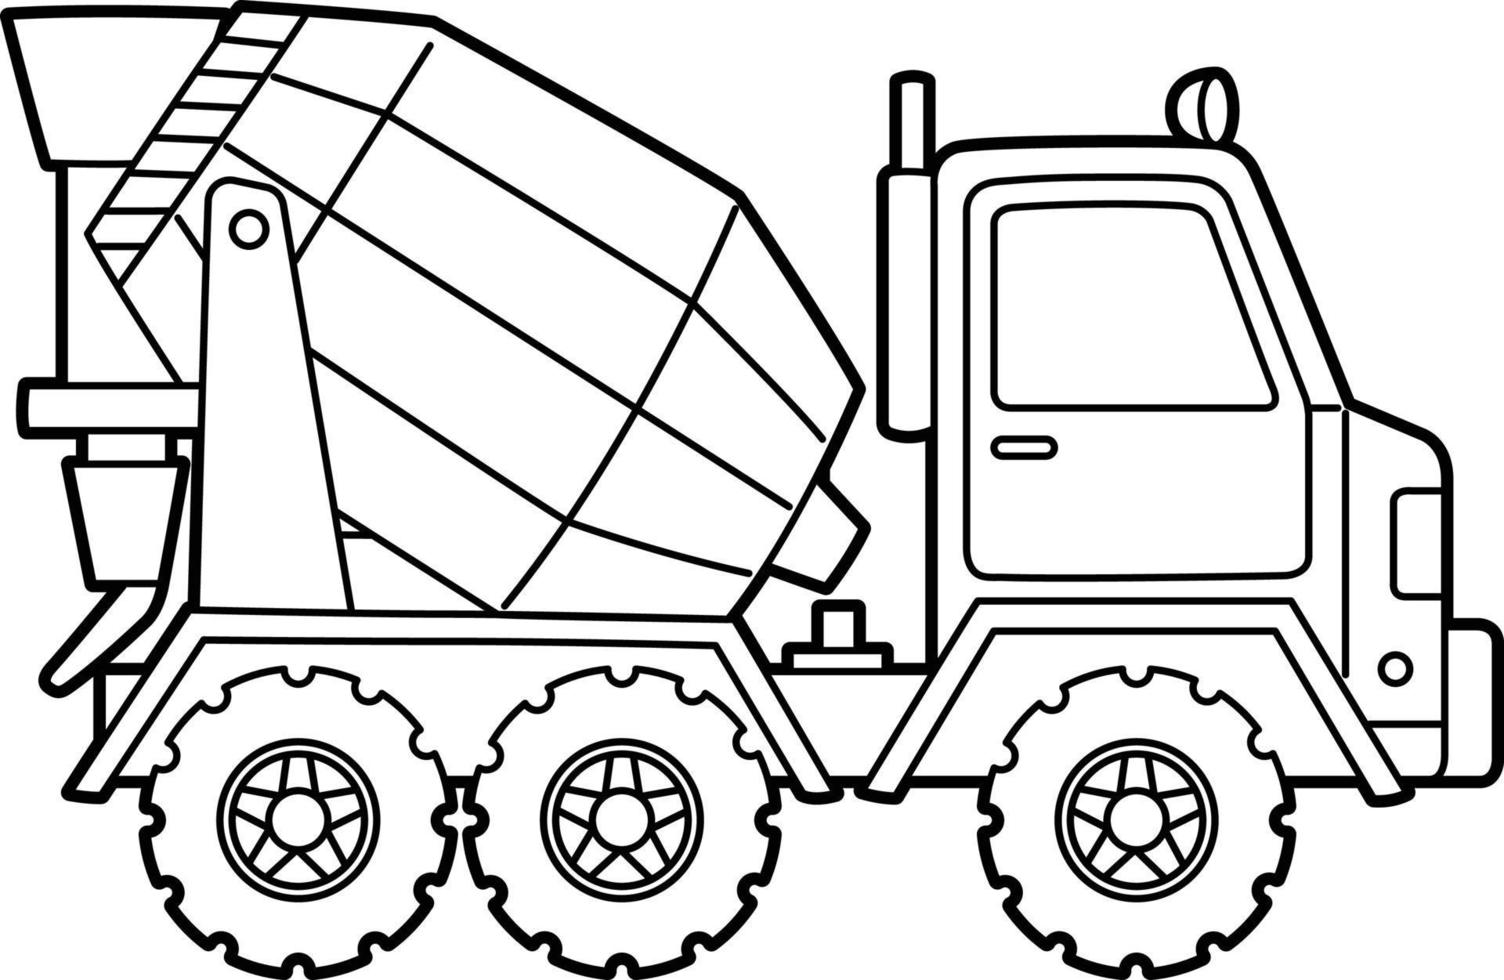 Concrete Mixer Coloring Page Isolated for Kids vector